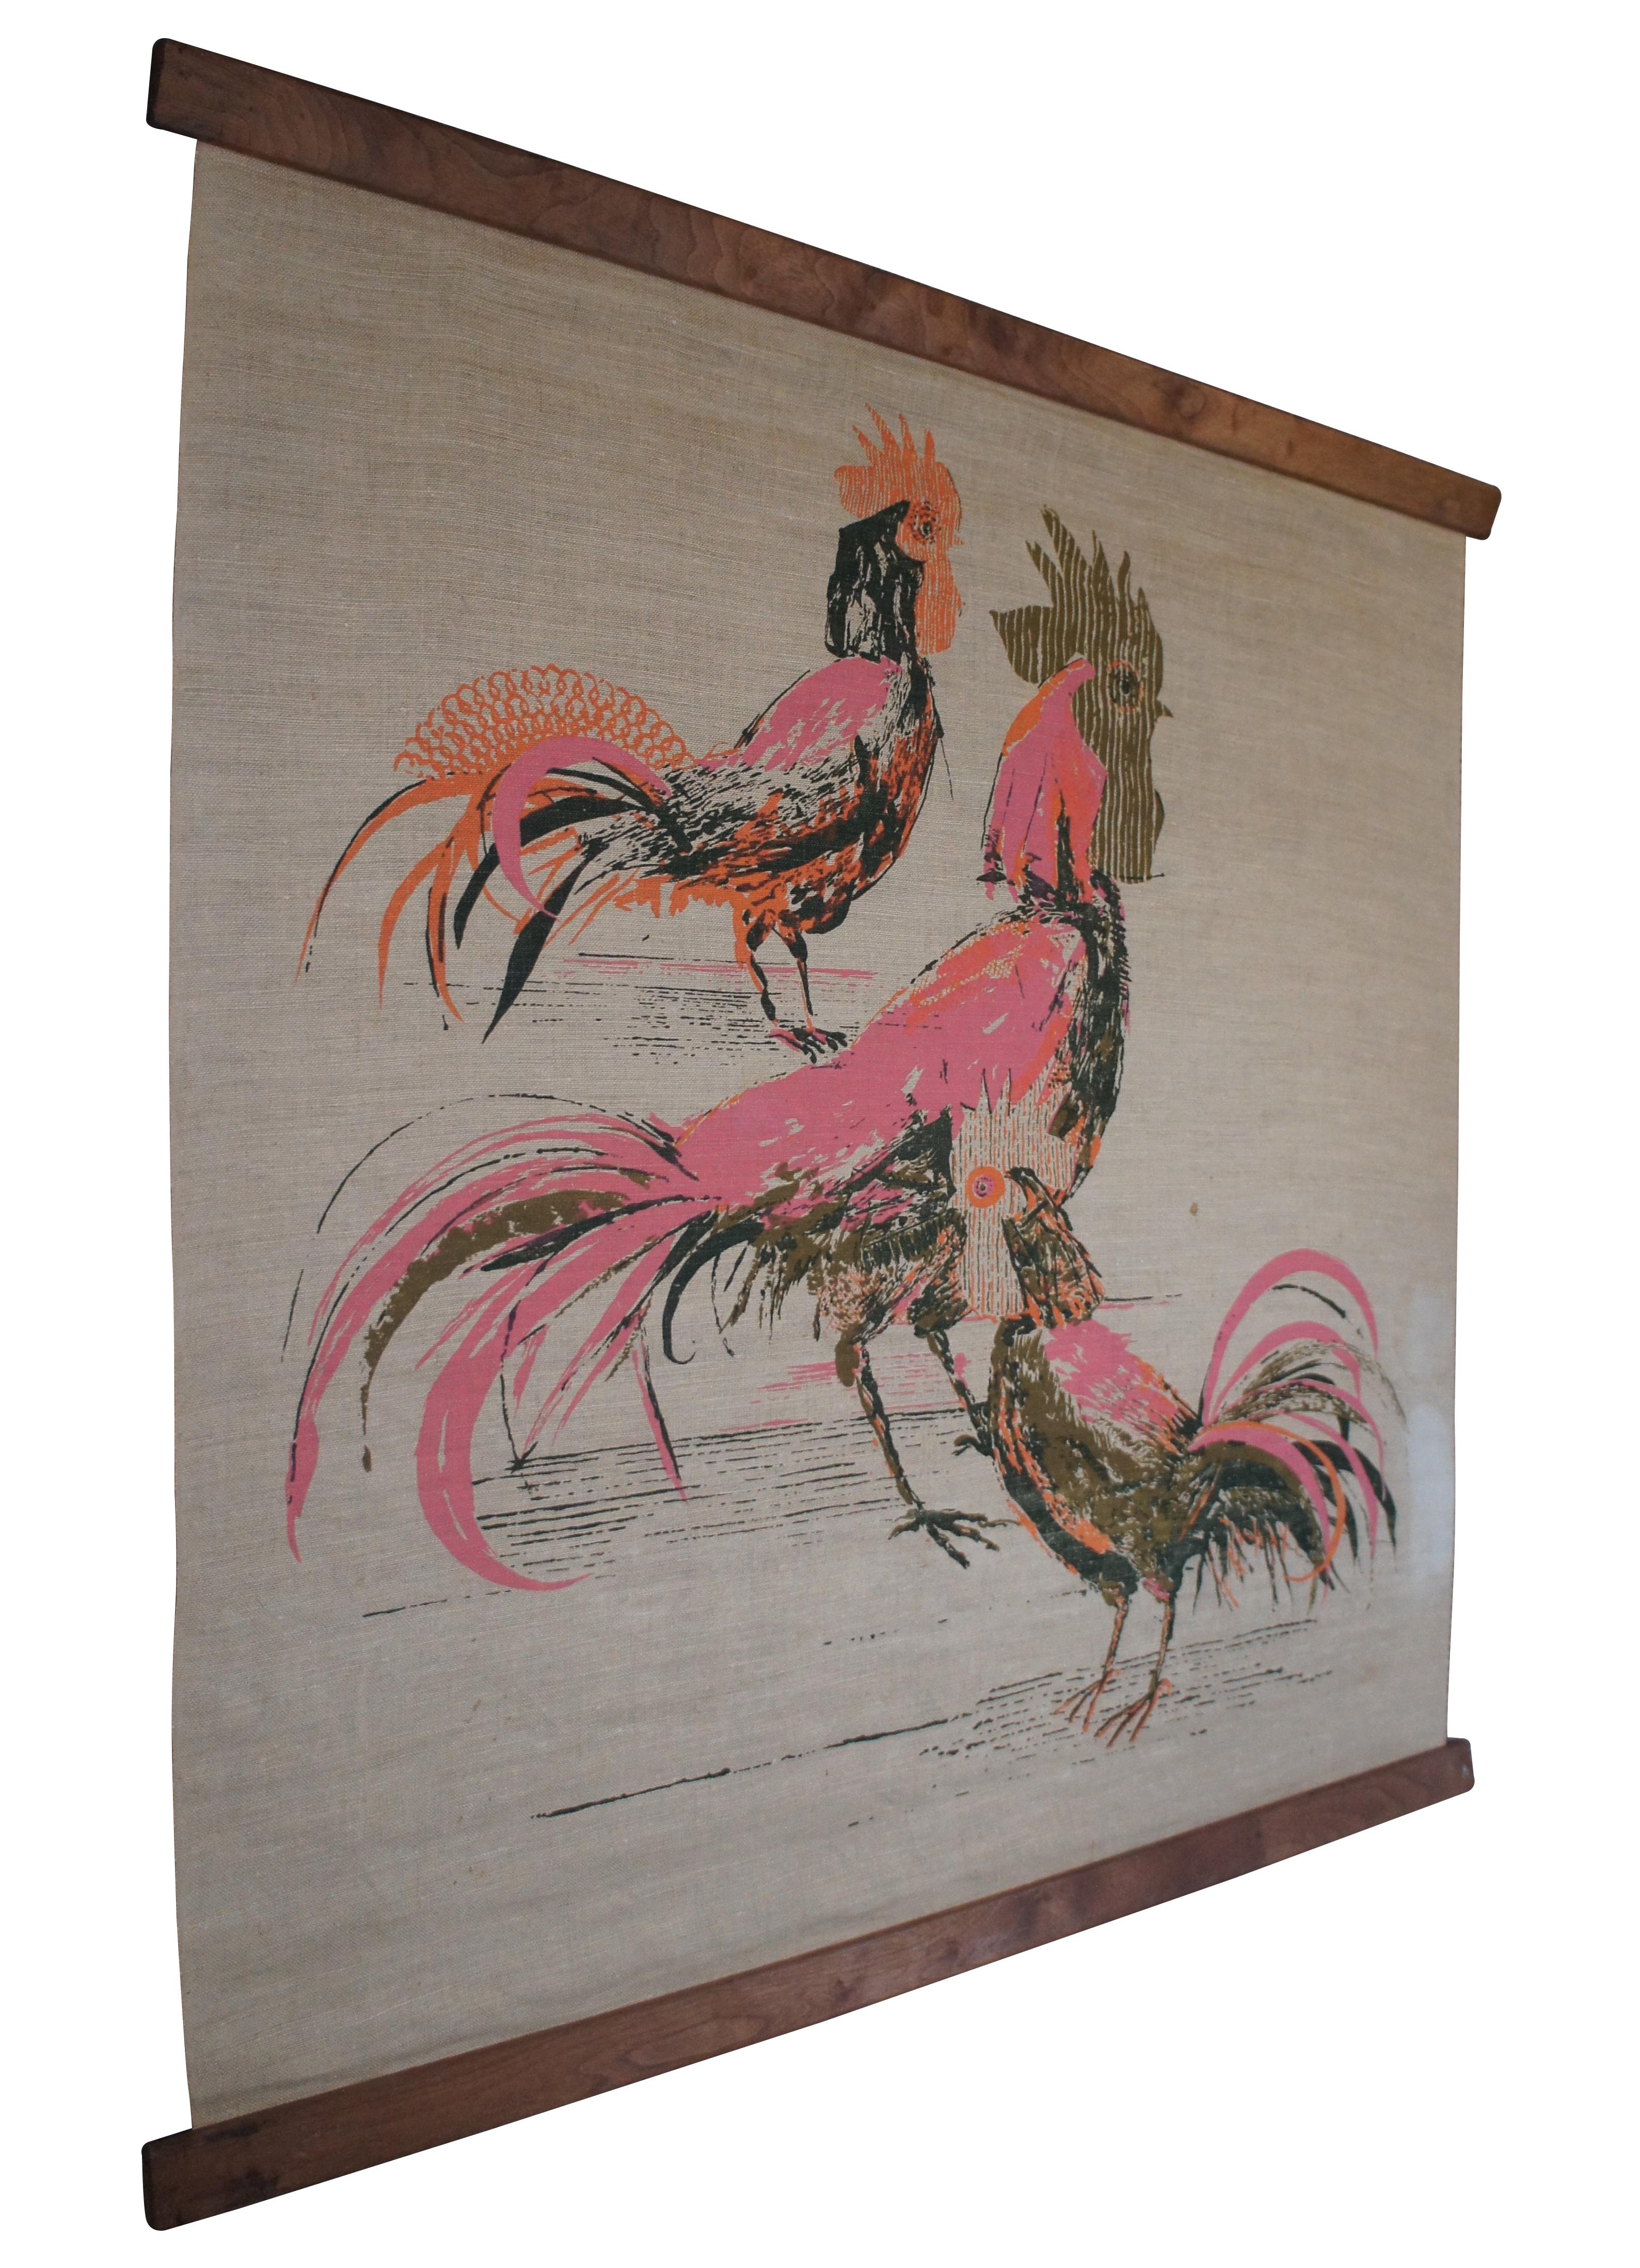 Midcentury Tom Tru Studios wall hanging tapestry wall art screenprint linen titled Chanticleer designed by Robert Bushong, distributed by Raymor. Fall 1959 Catalog number C55, variation C showing a trio of cocks / roosters / chickens printed in